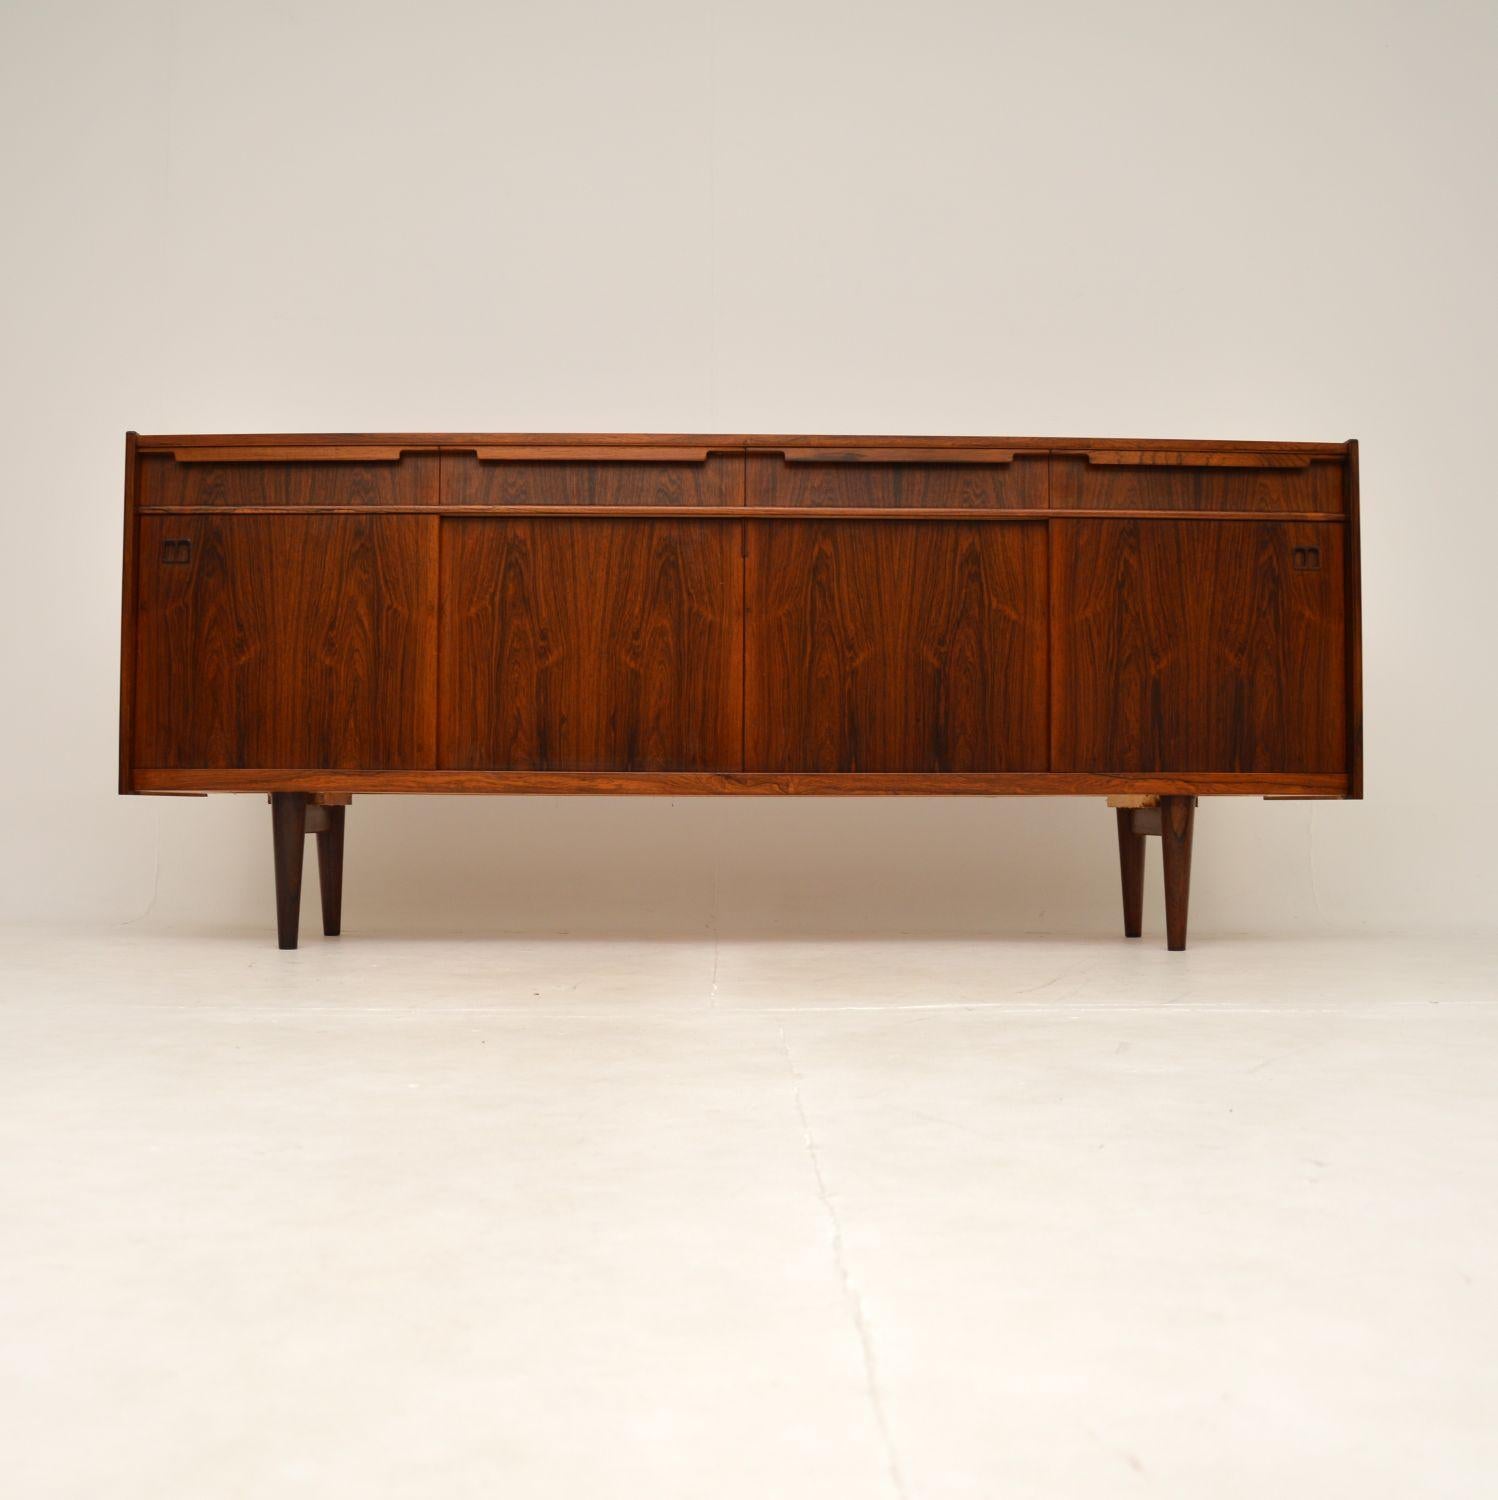 A stunning and extremely rare Danish sideboard by Johannes Andersen for Bernhard Pedersen. This was made in Denmark, it dates from the 1960’s.

The quality is outstanding, this is beautifully designed and looks amazing from all angles. The top